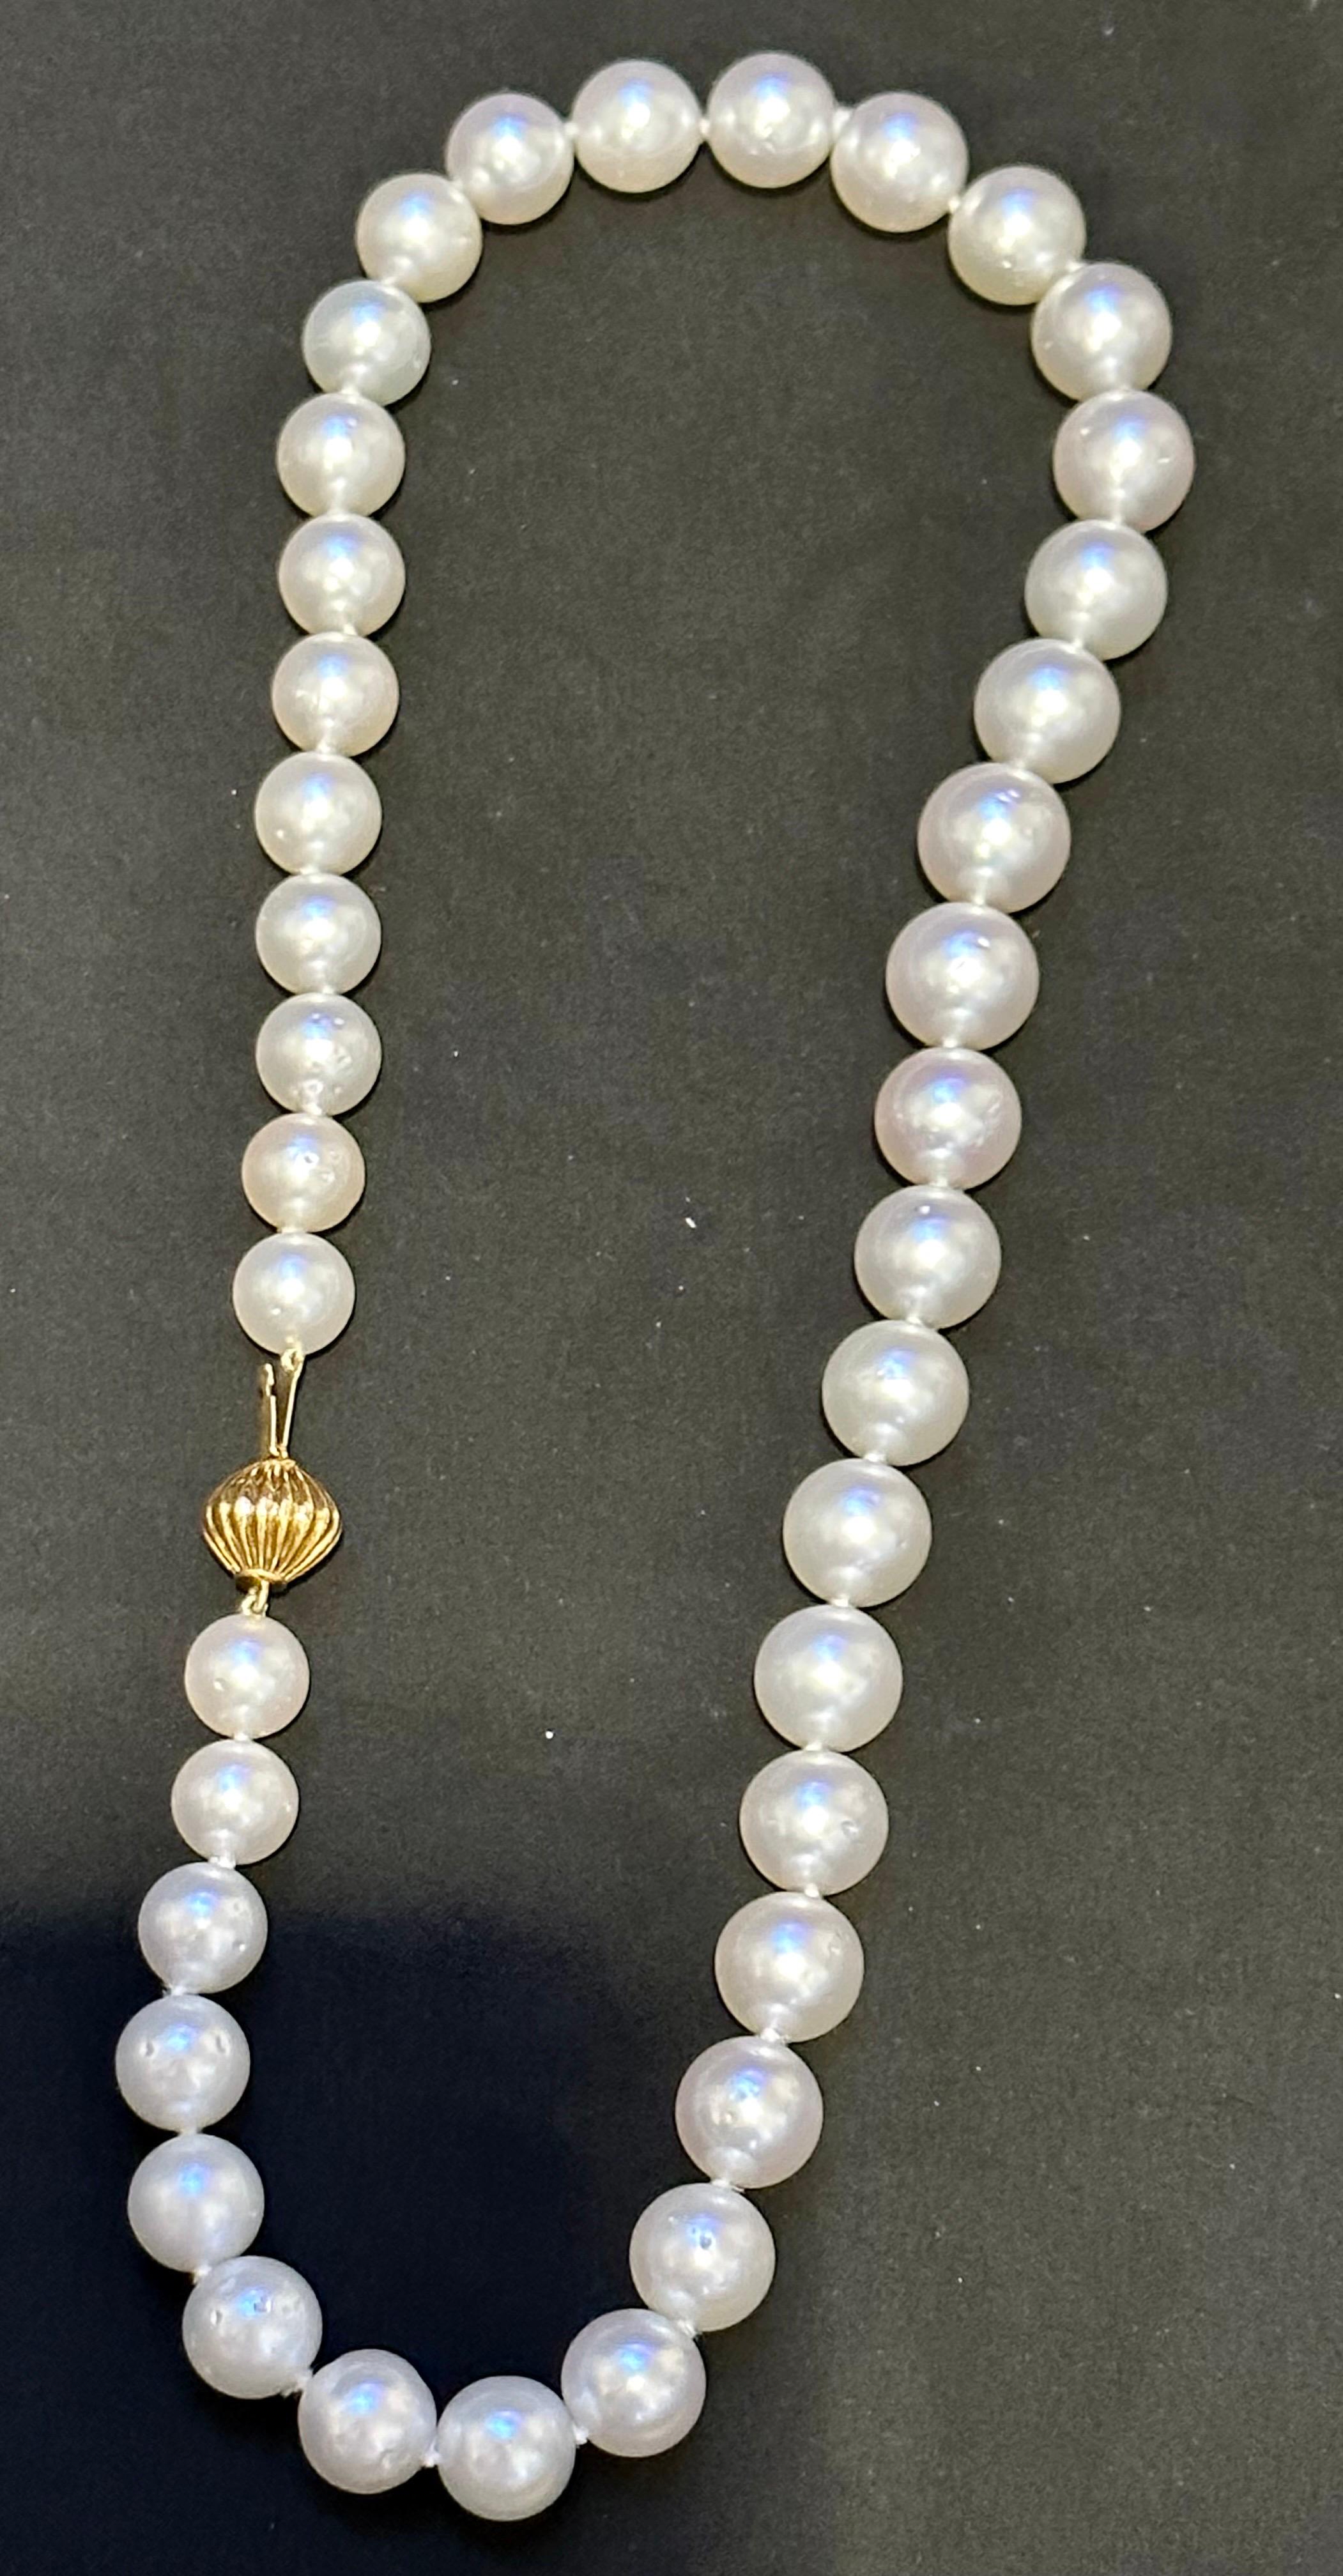 Graduating White South Sea Pearls 9-12mm Strand Necklace 14 Kt Yellow Gold Clasp For Sale 1